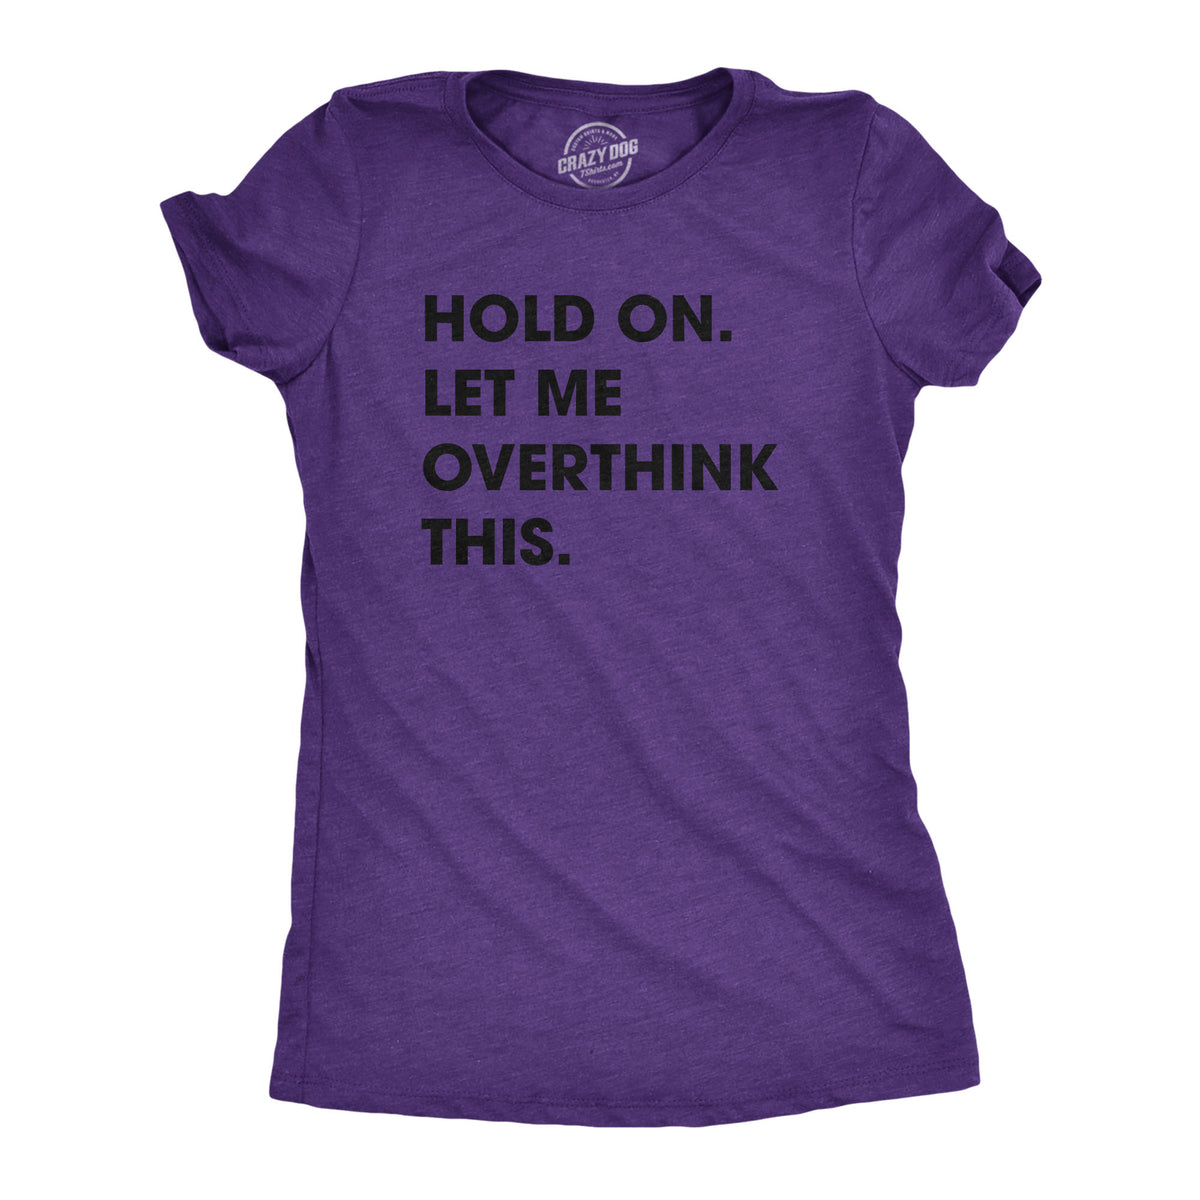 Funny Heather Purple Hold On Let Me Overthink This Womens T Shirt Nerdy Introvert Tee